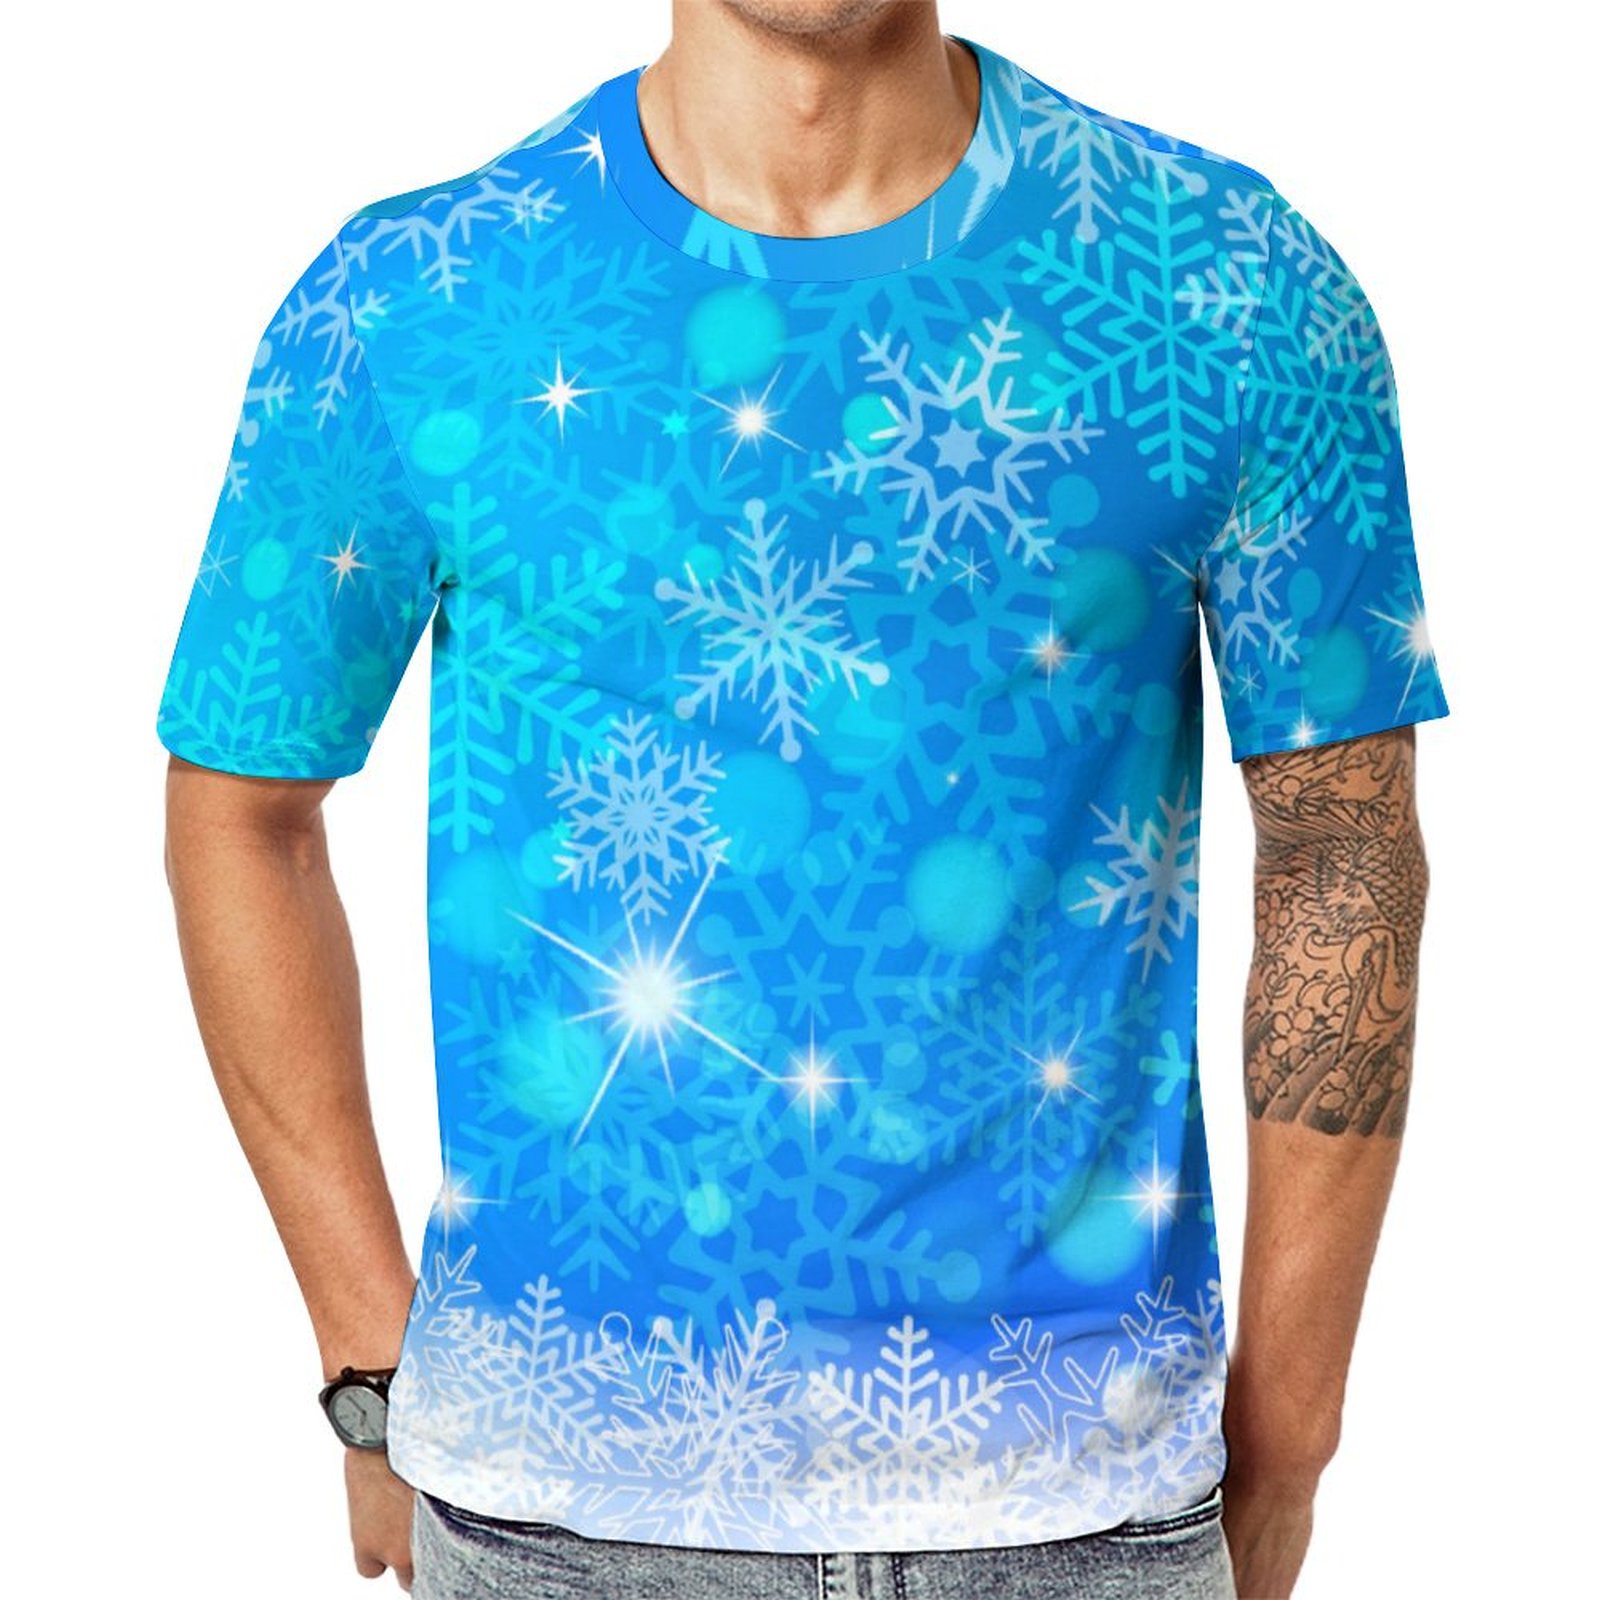 Ice And Snow Blue White Christmas Short Sleeve Print Unisex Tshirt Summer Casual Tees for Men and Women Coolcoshirts